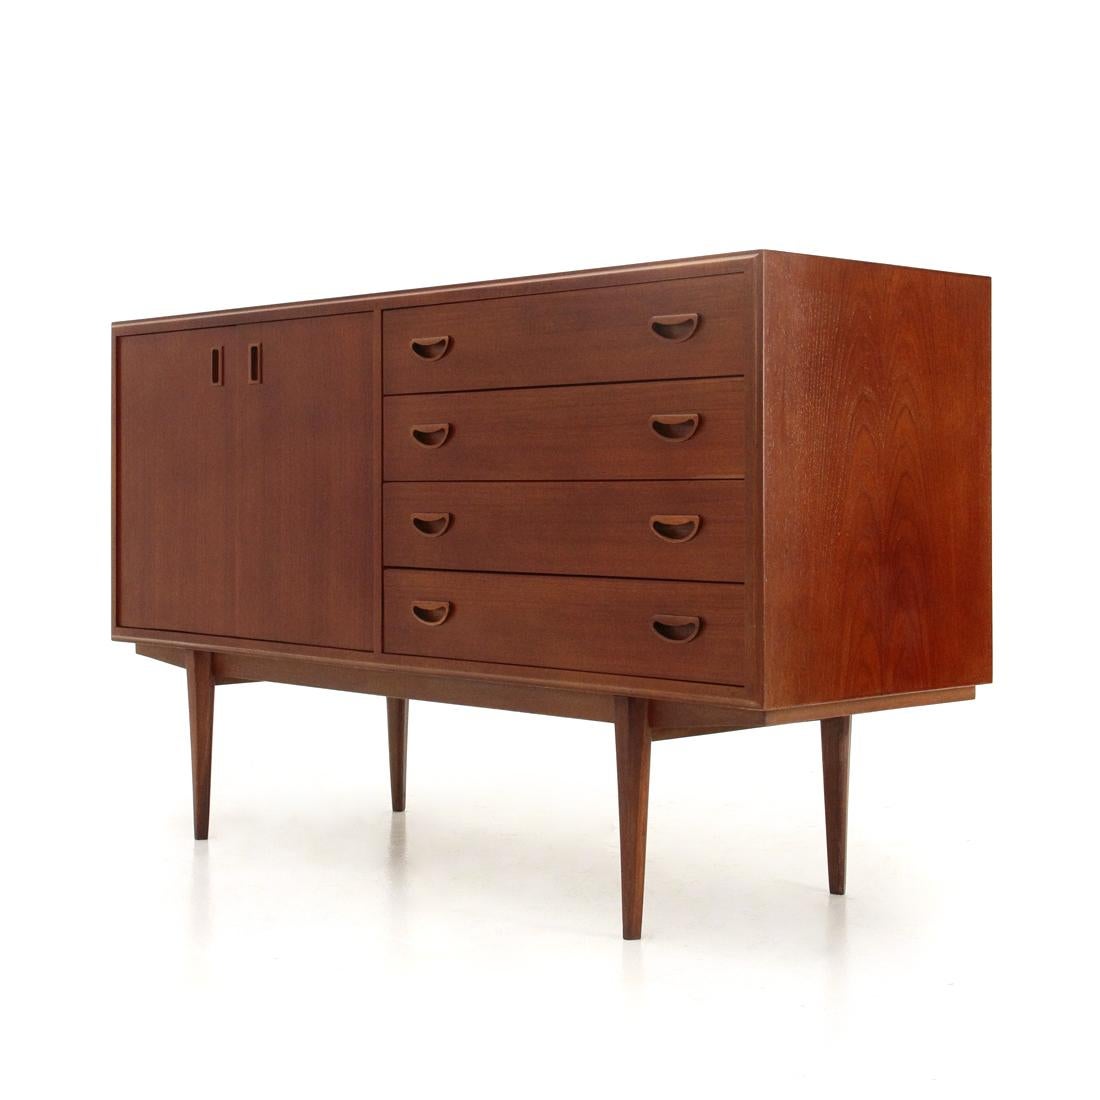 Mid-Century Modern Sideboard with Drawers, 1960s